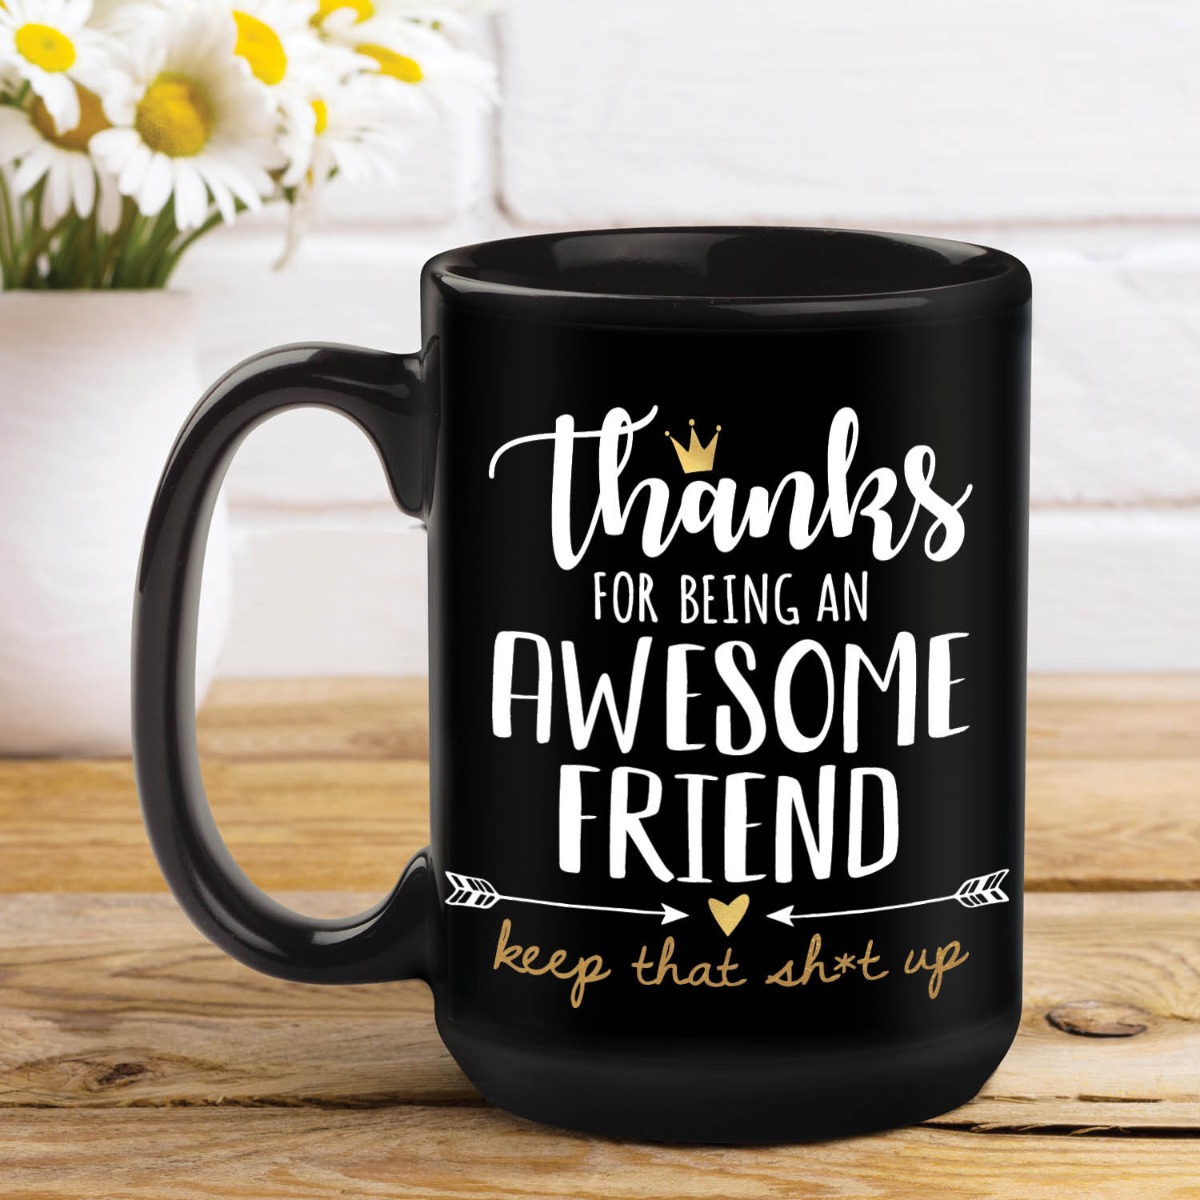 Thanks for Being an Awesome Friend Personalized Black Coffee Mug - 15oz